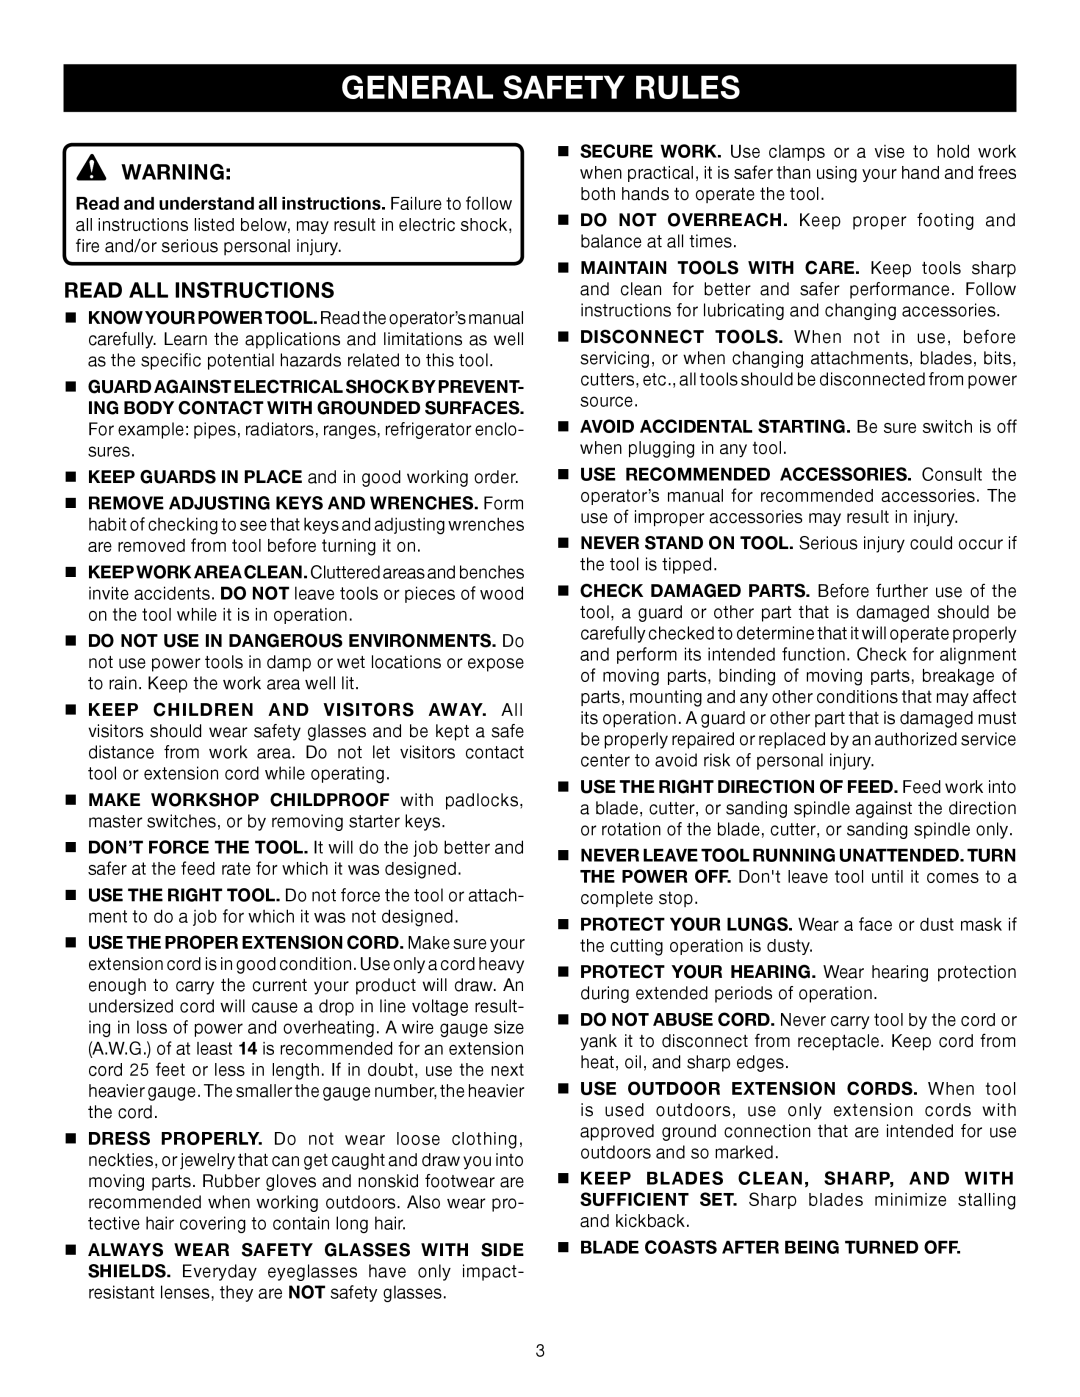 Ryobi TS1552DXL manual General Safety Rules, Read All Instructions 